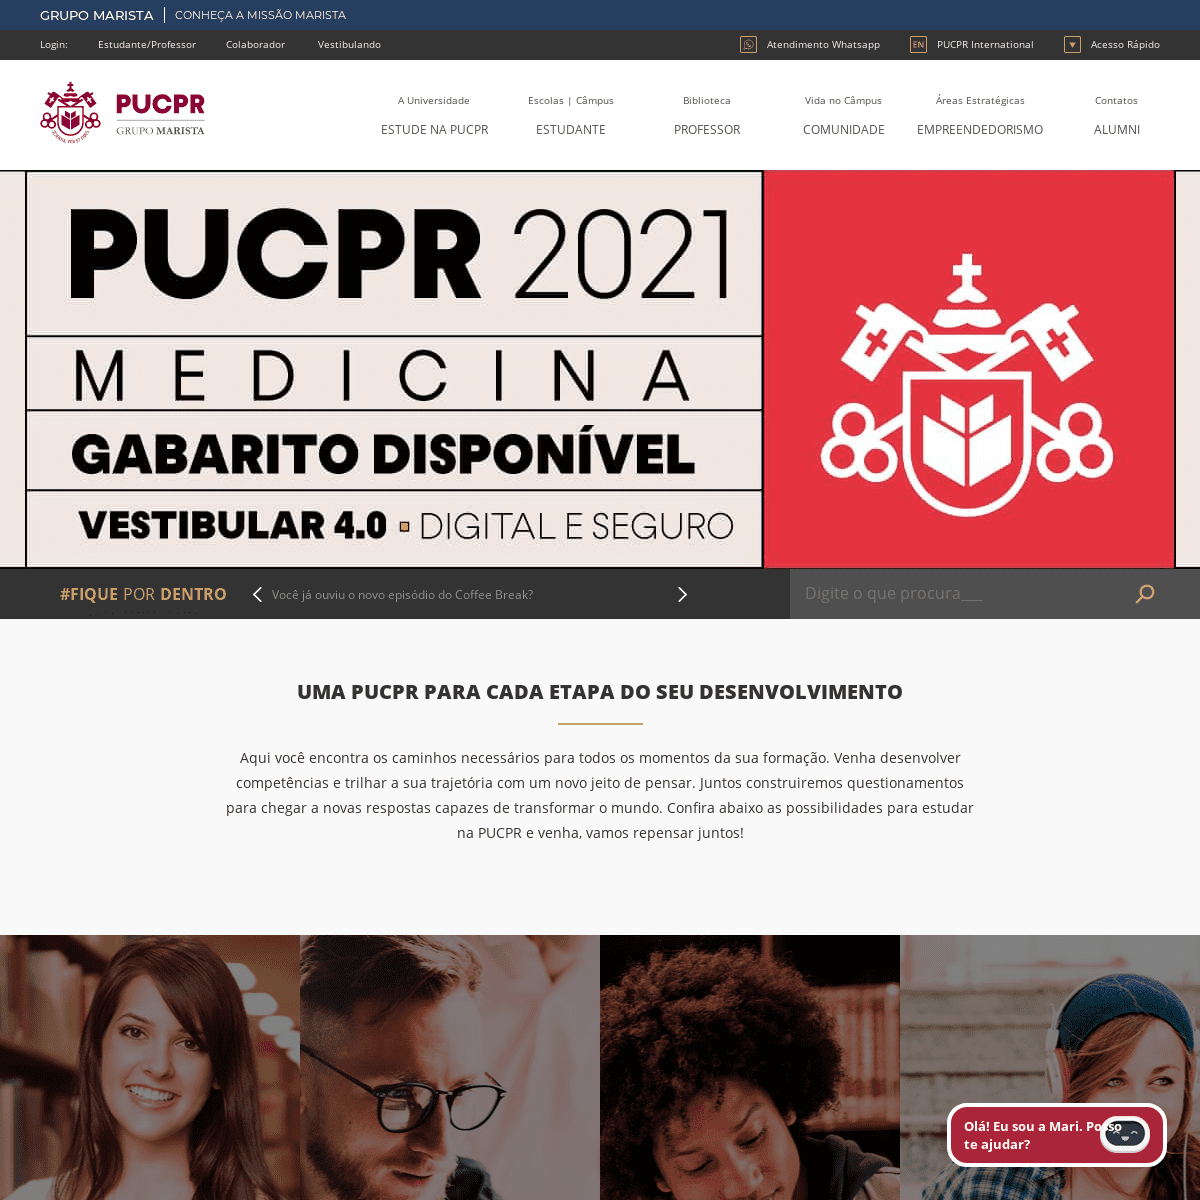 A complete backup of pucpr.br